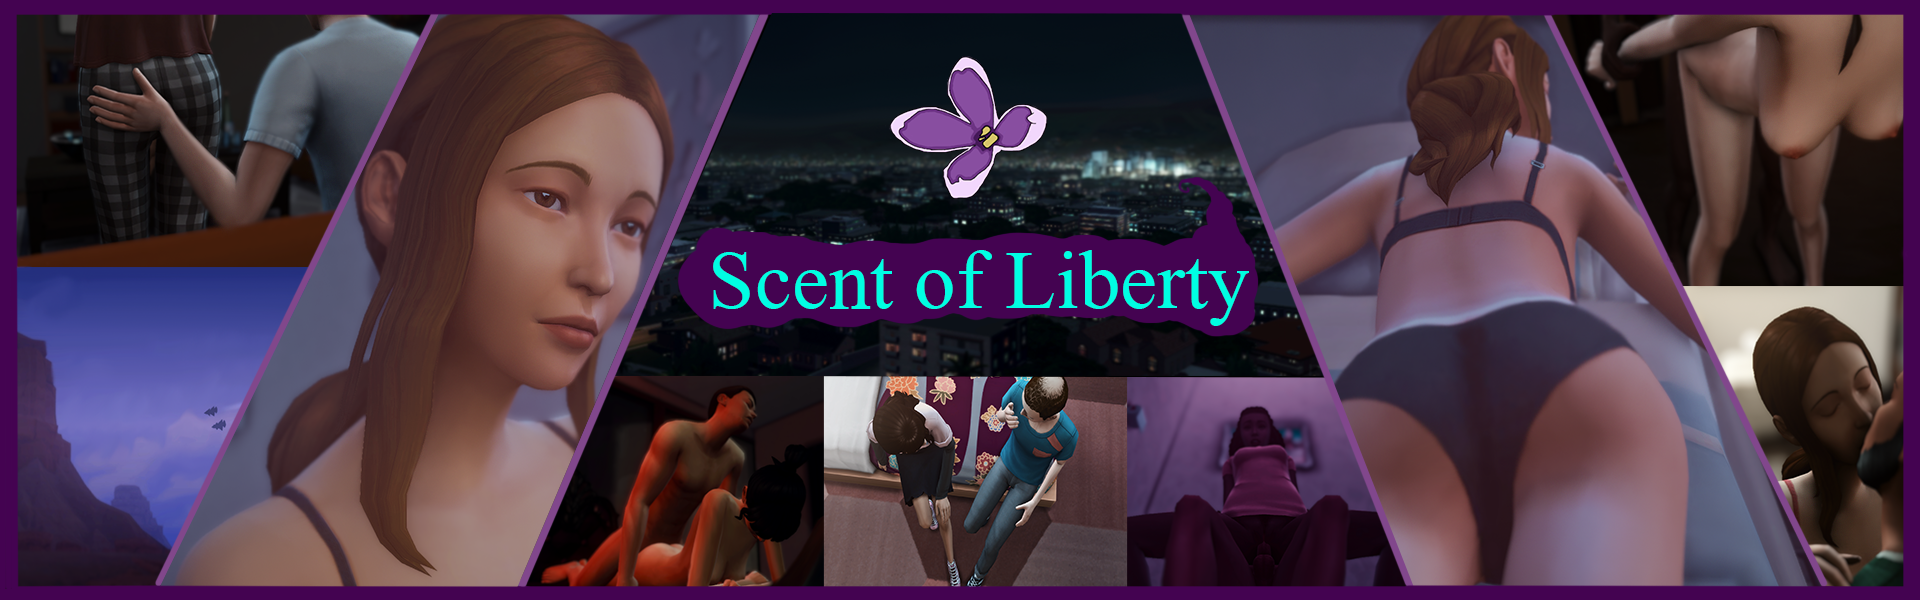 Scent of Liberty poster